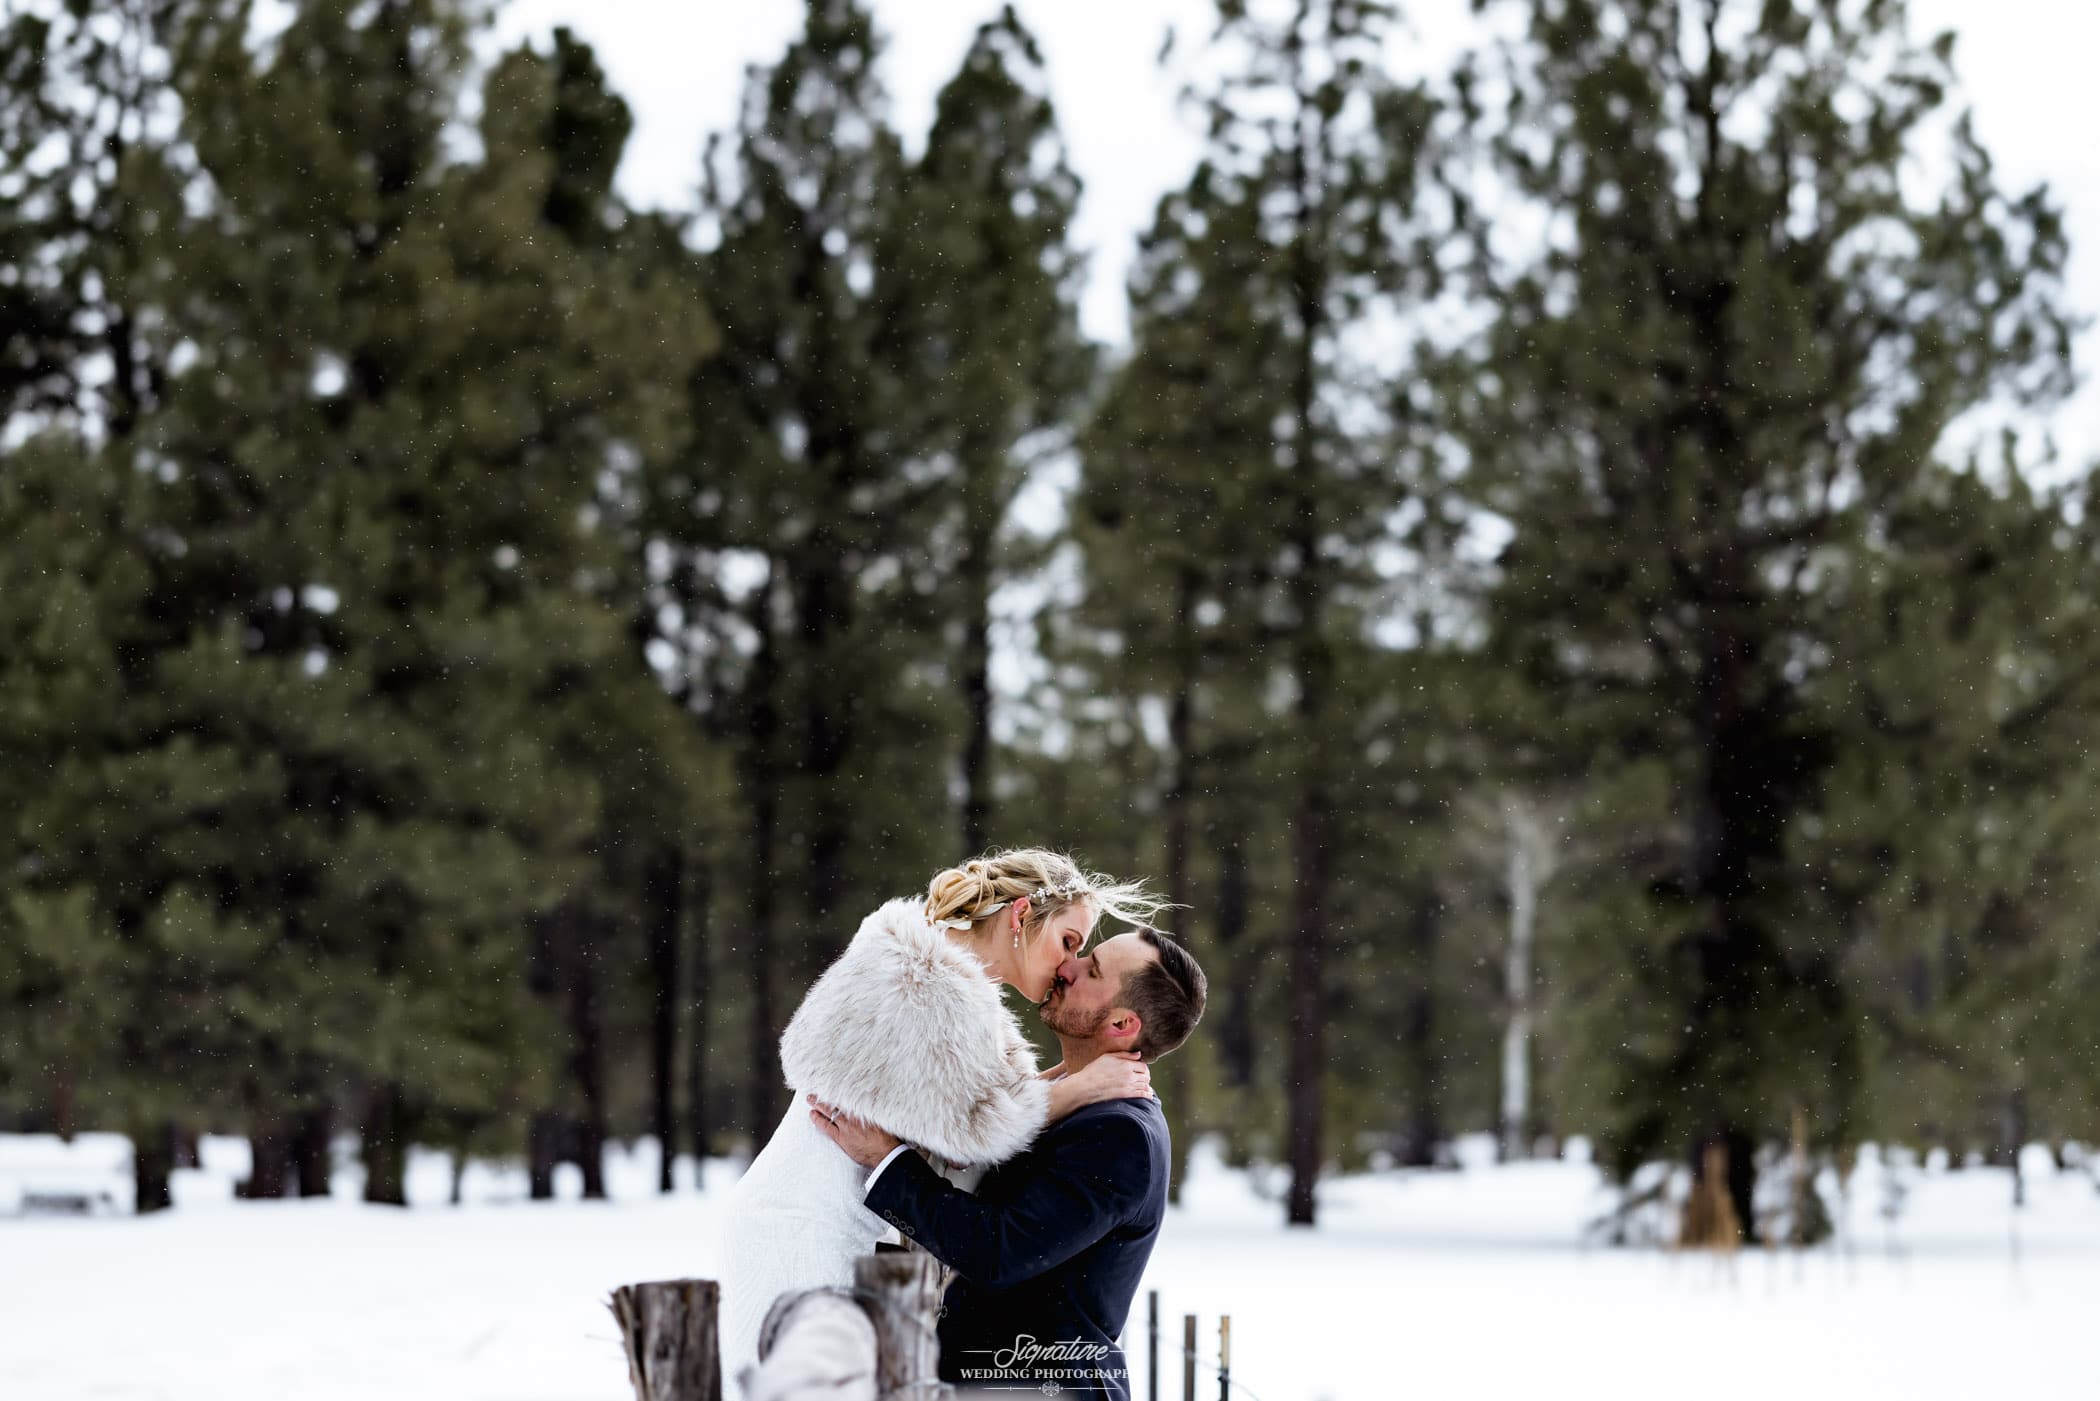 Bride and groom kissing in winter forest